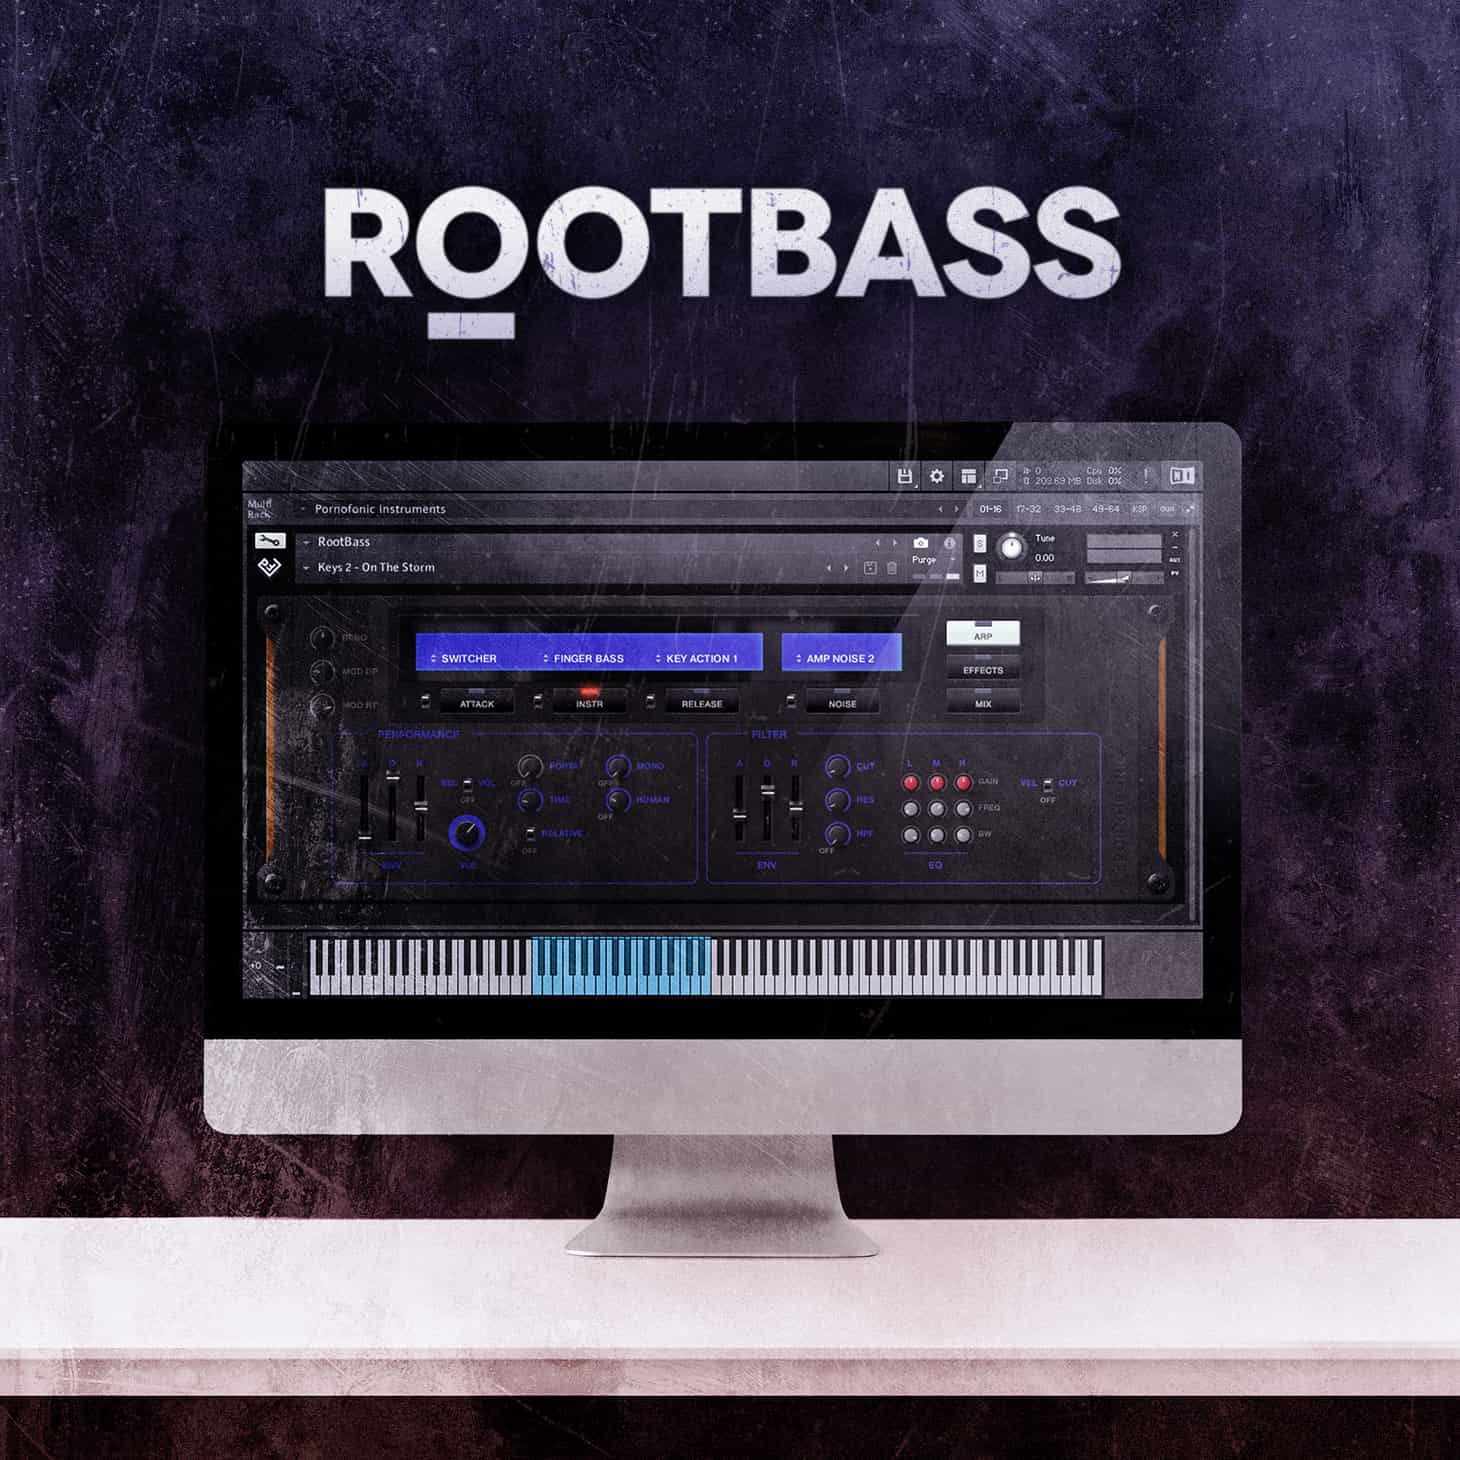 RootBass by pornofonic Instruments – The Next Dirty Kontakt Instrument for Filthy Minds